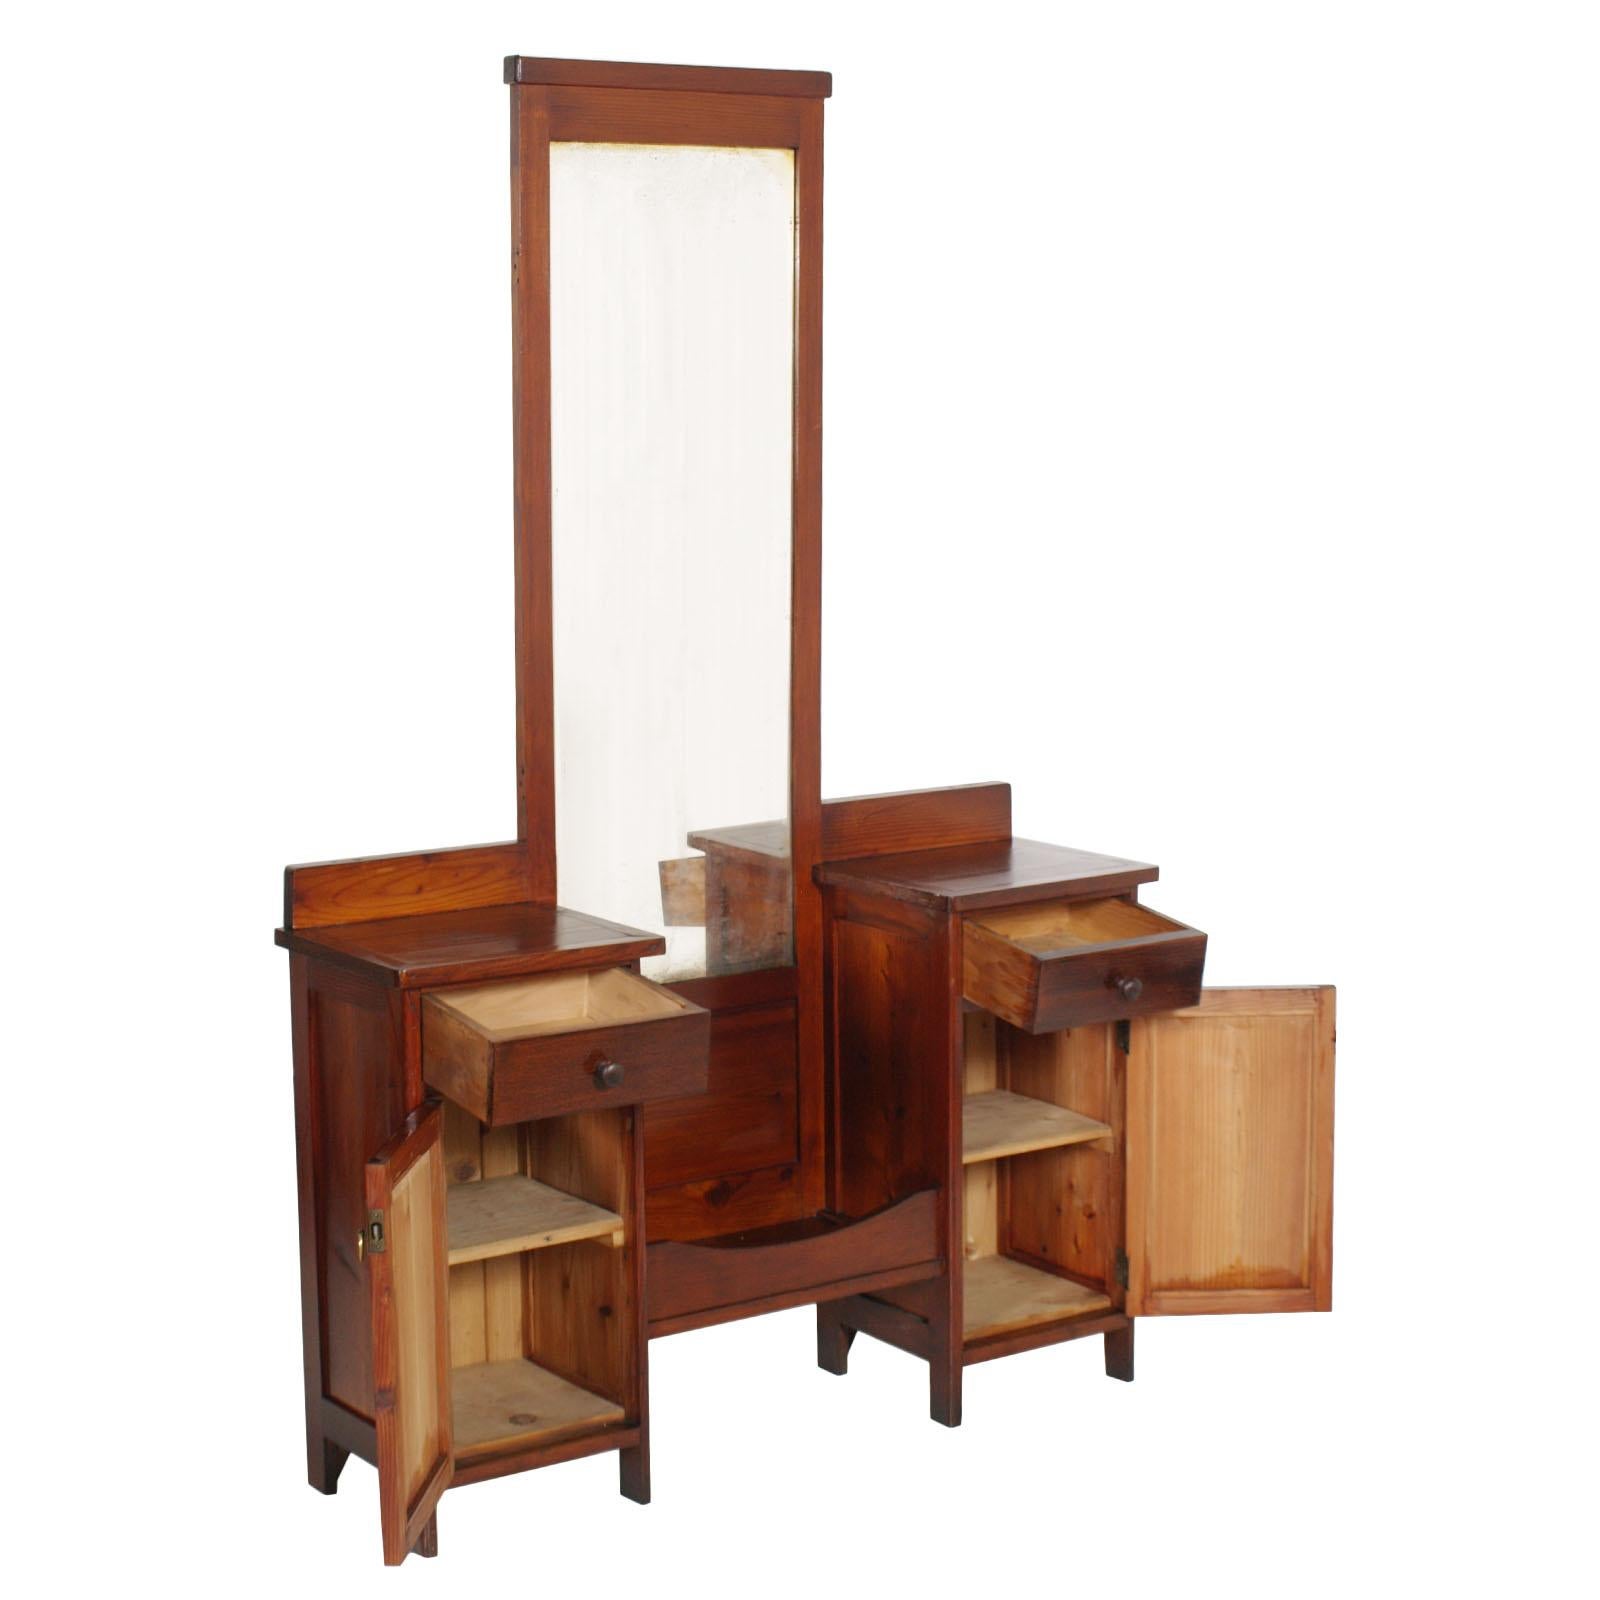 Antique  country vanity, entry mirror with cabinets, all solid pine restored and wax polished 

Measures cm: H 175, W 112, D 32.